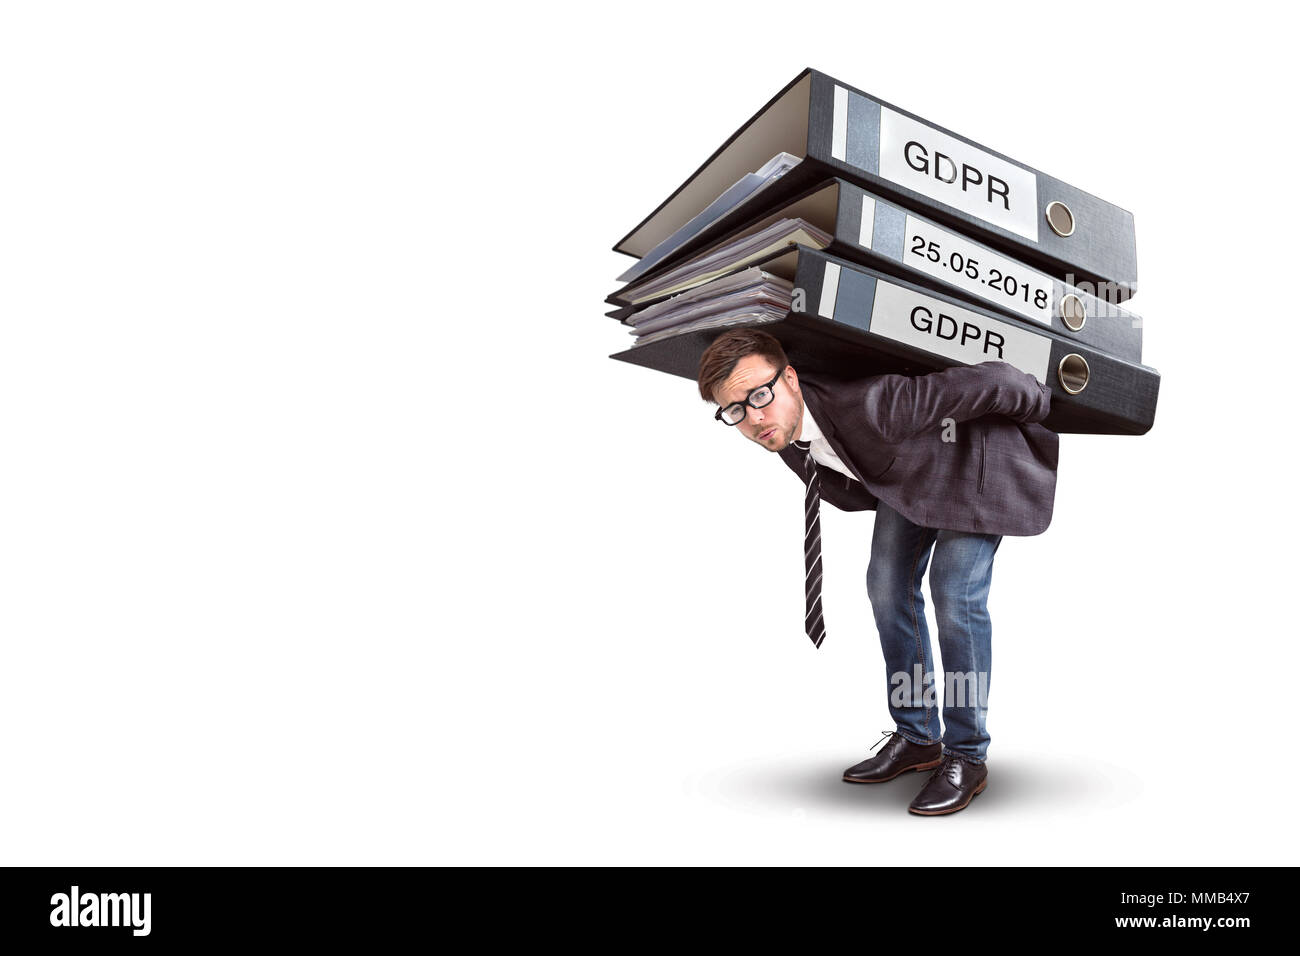 Man carrying an enormous stack of GDPR files Stock Photo